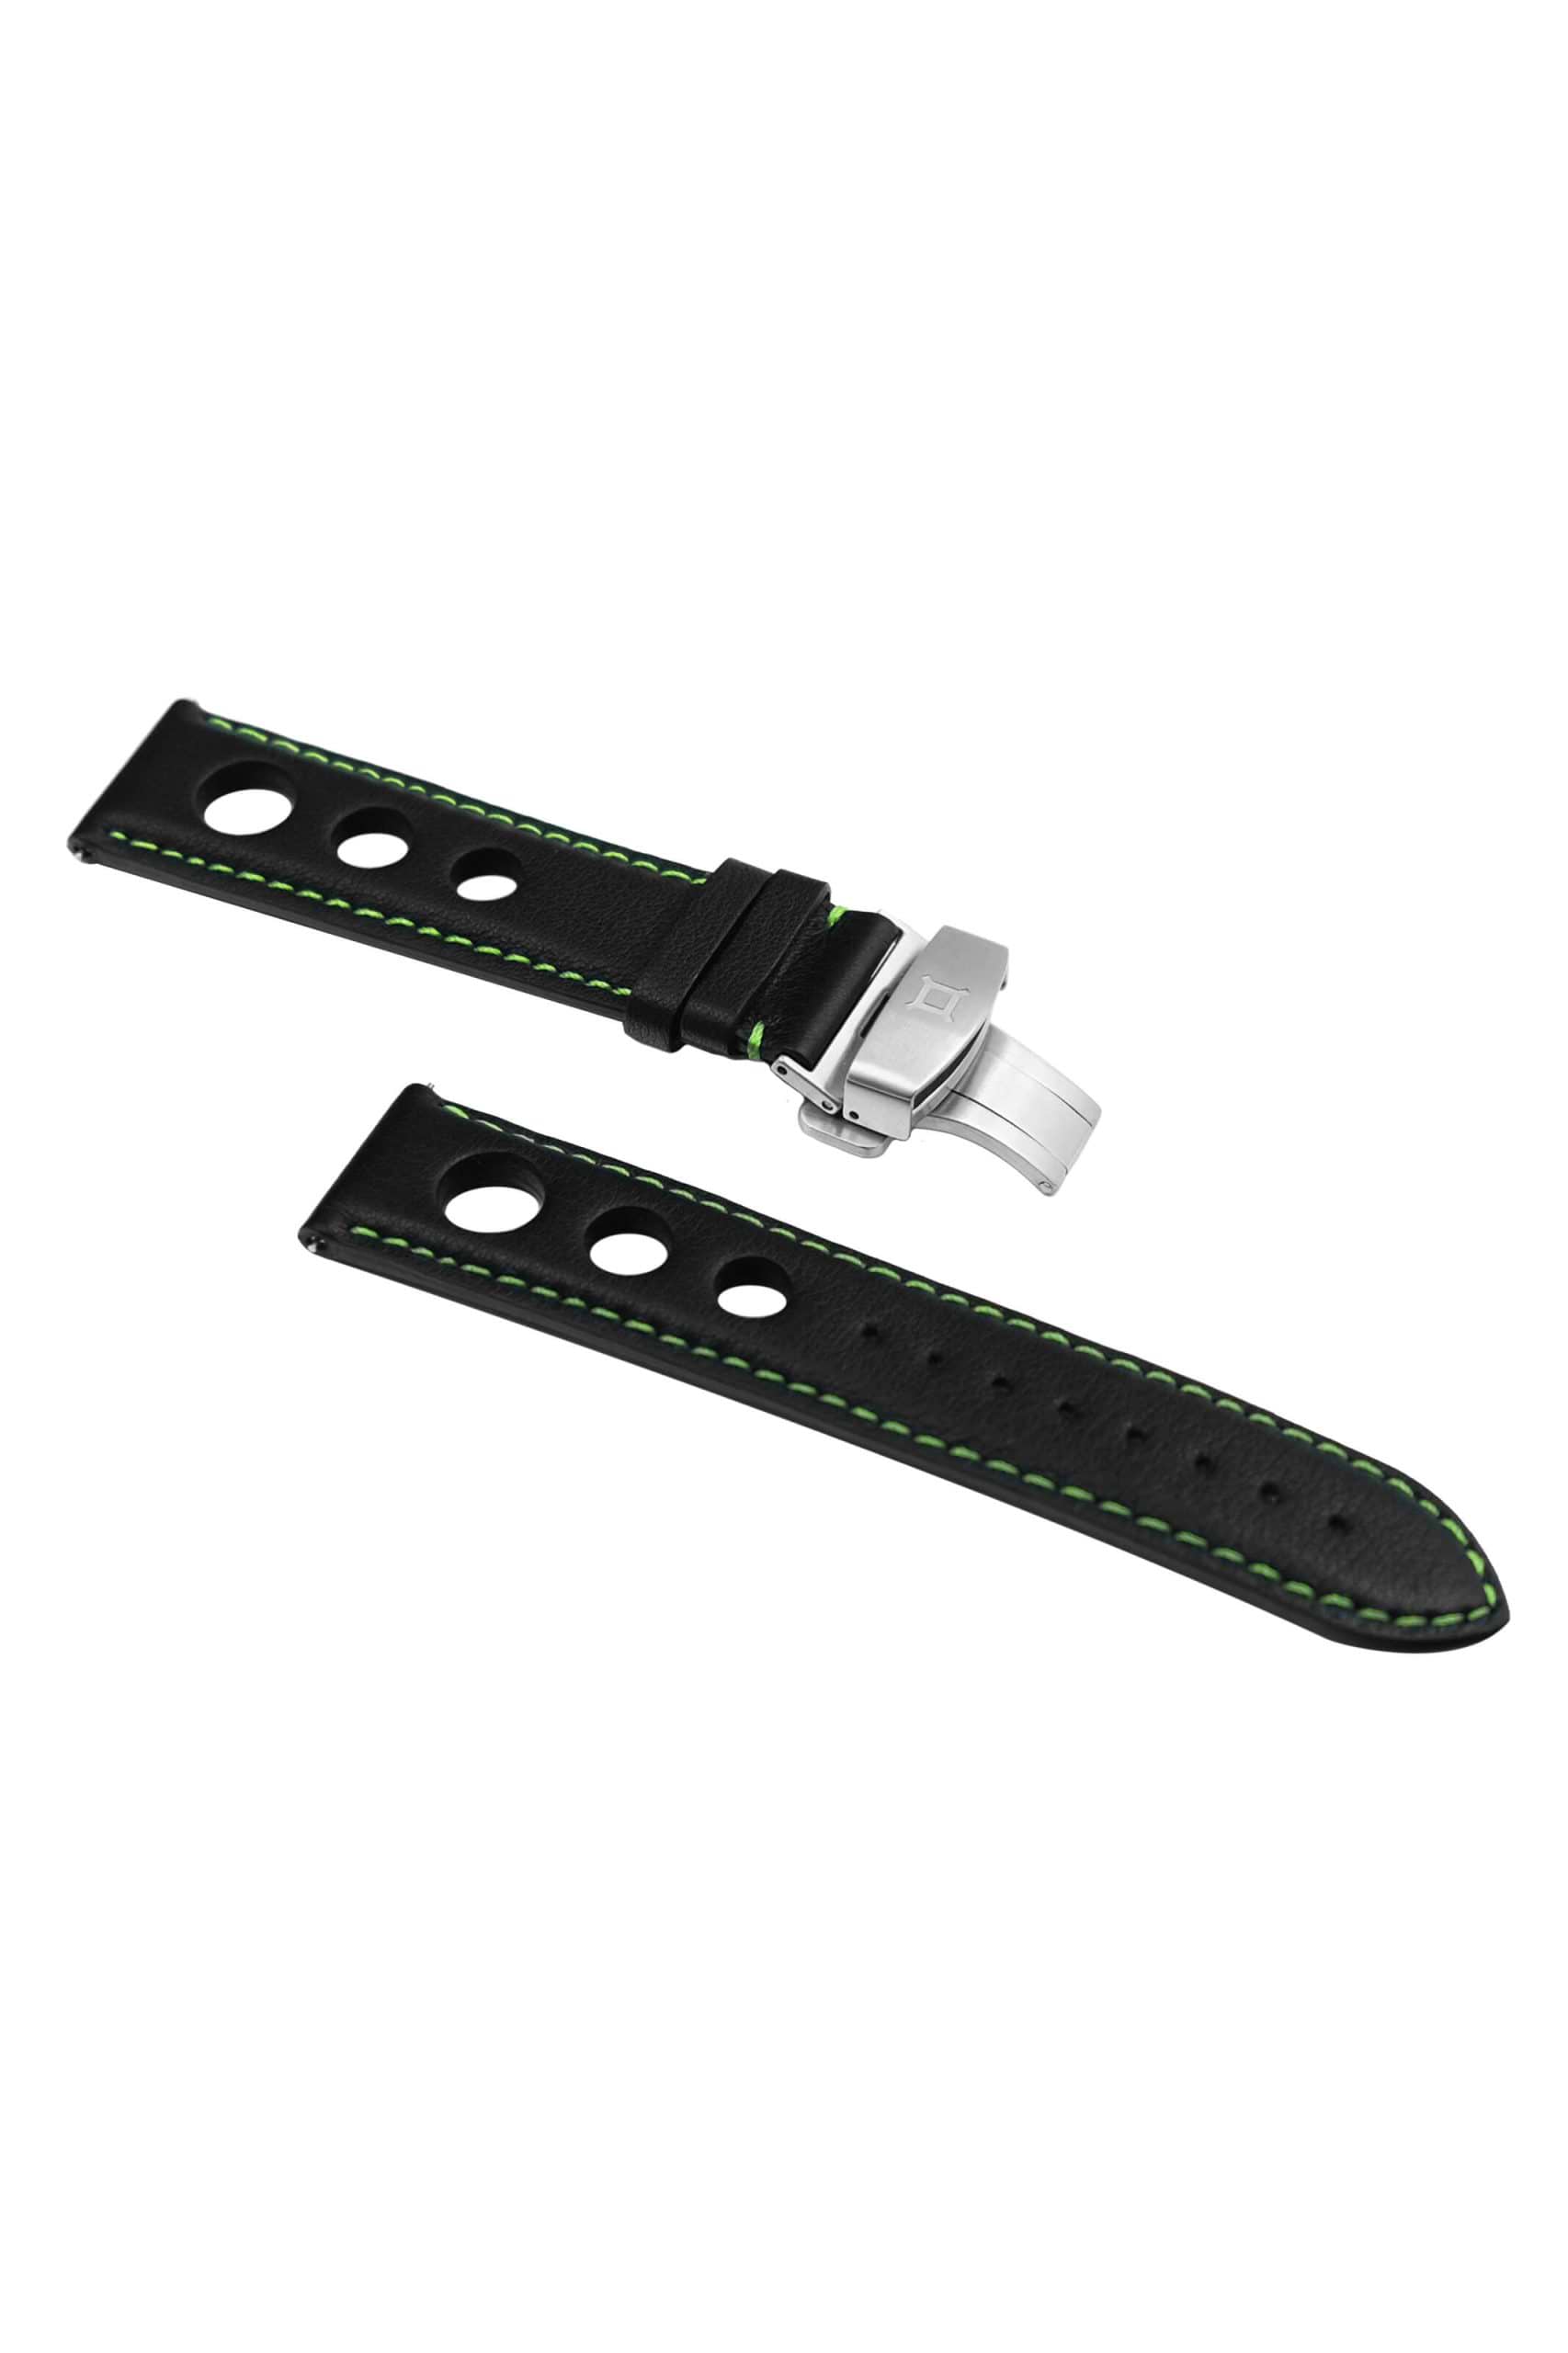 Dark olive green GT racing car with leather strap and light grey speedometer.